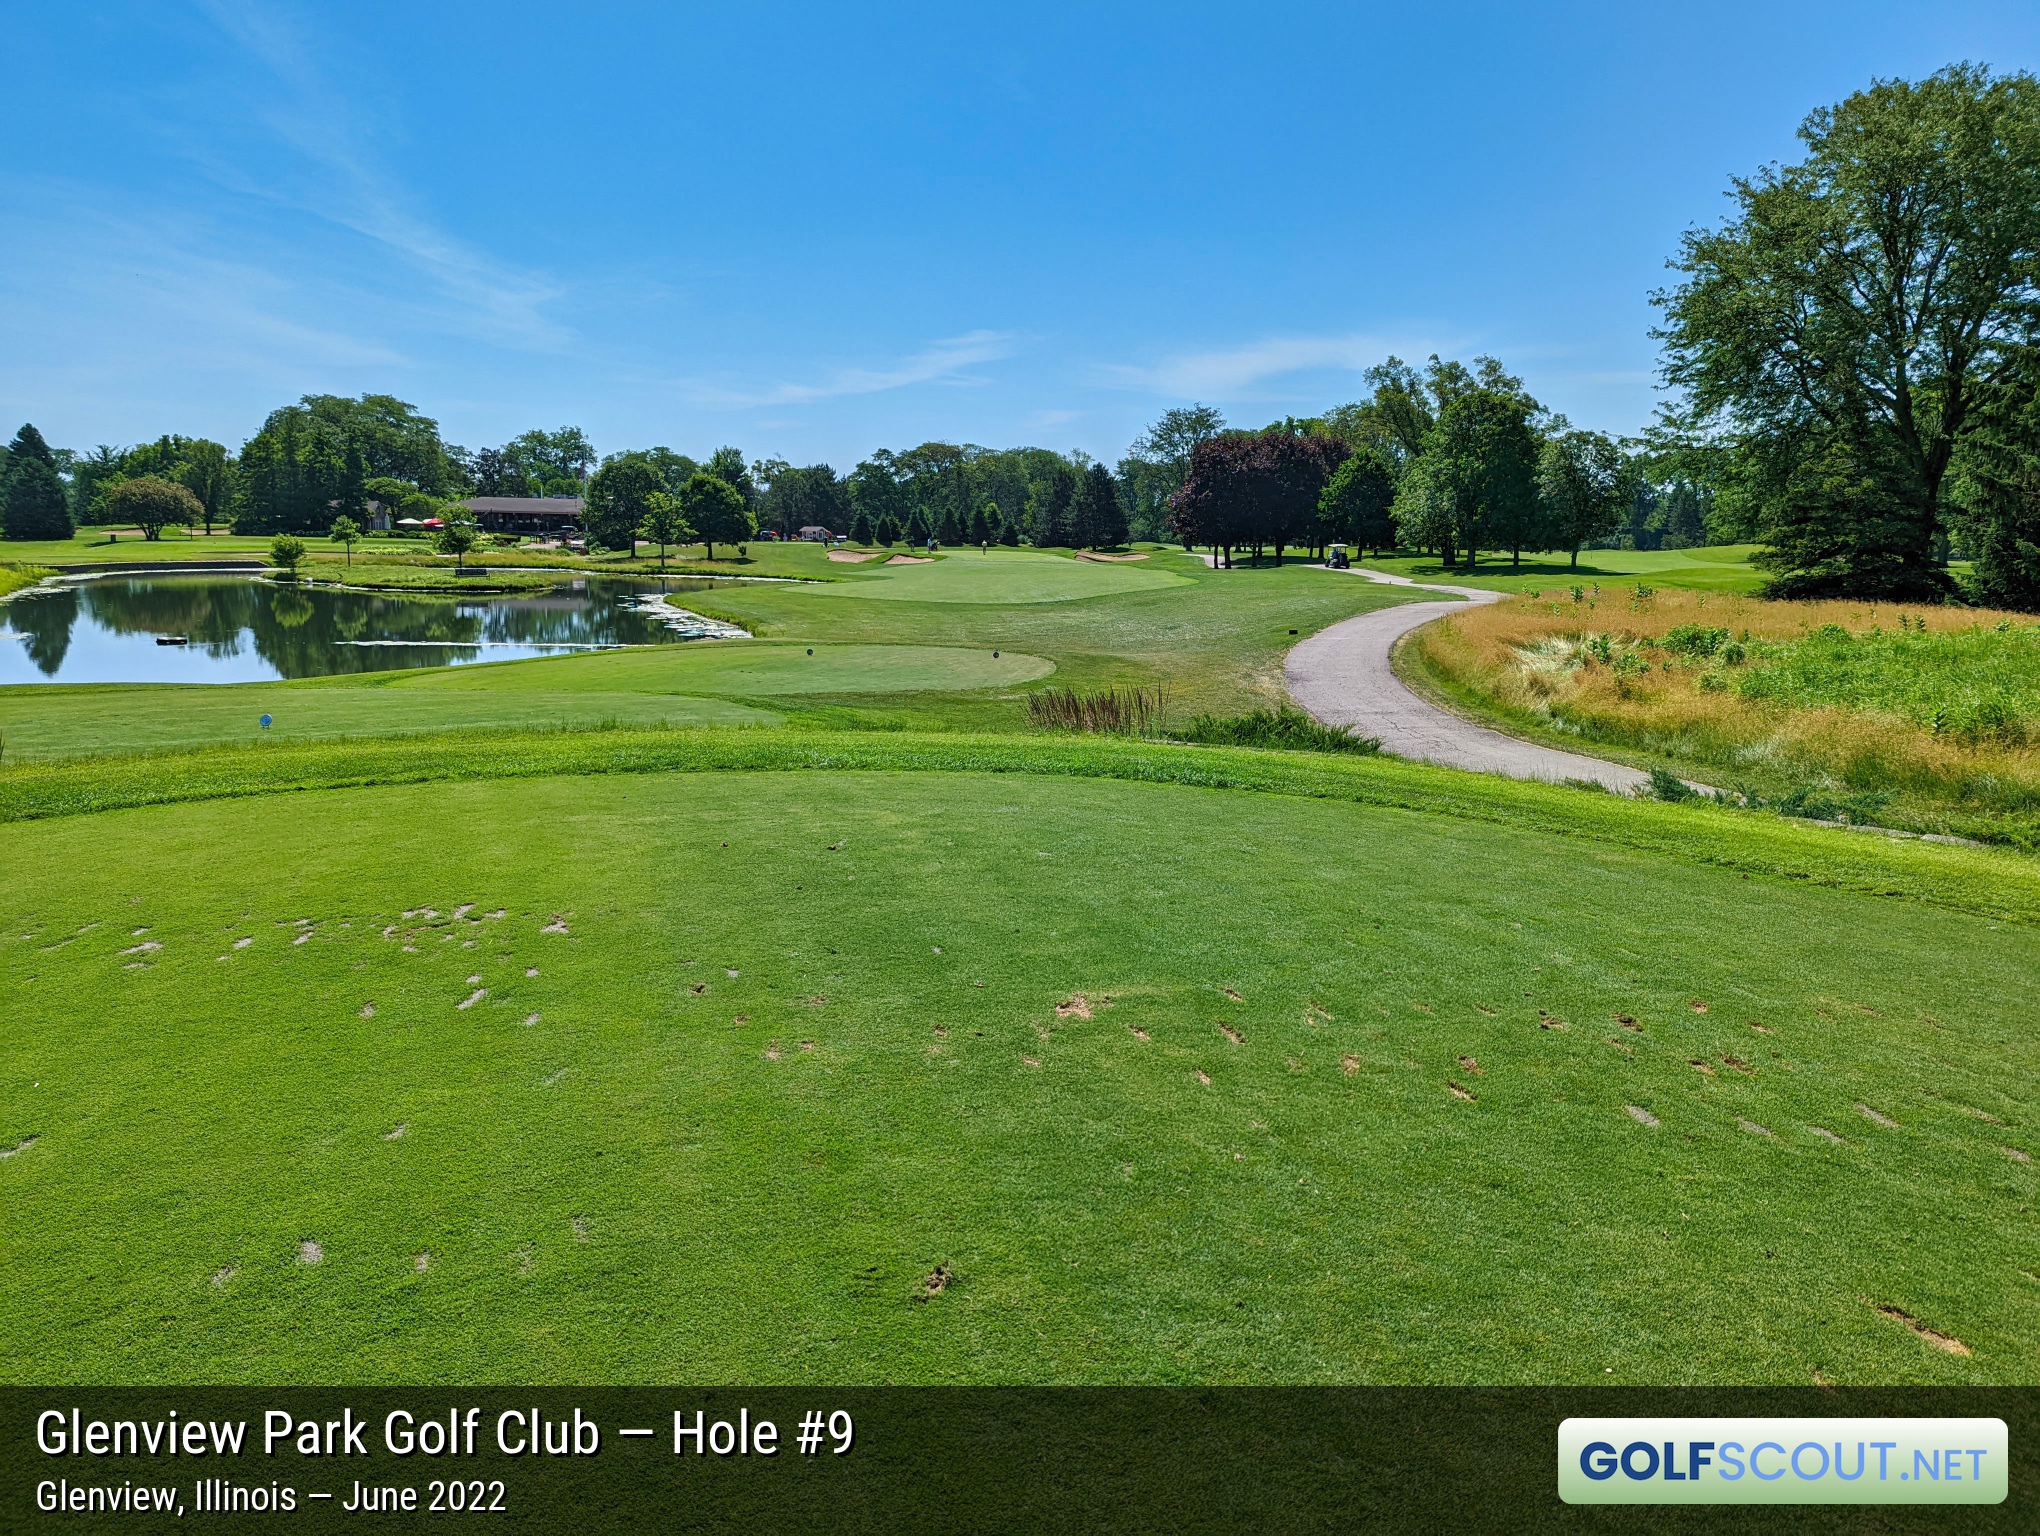 Photo of hole #9 at Glenview Park Golf Club in Glenview, Illinois. 